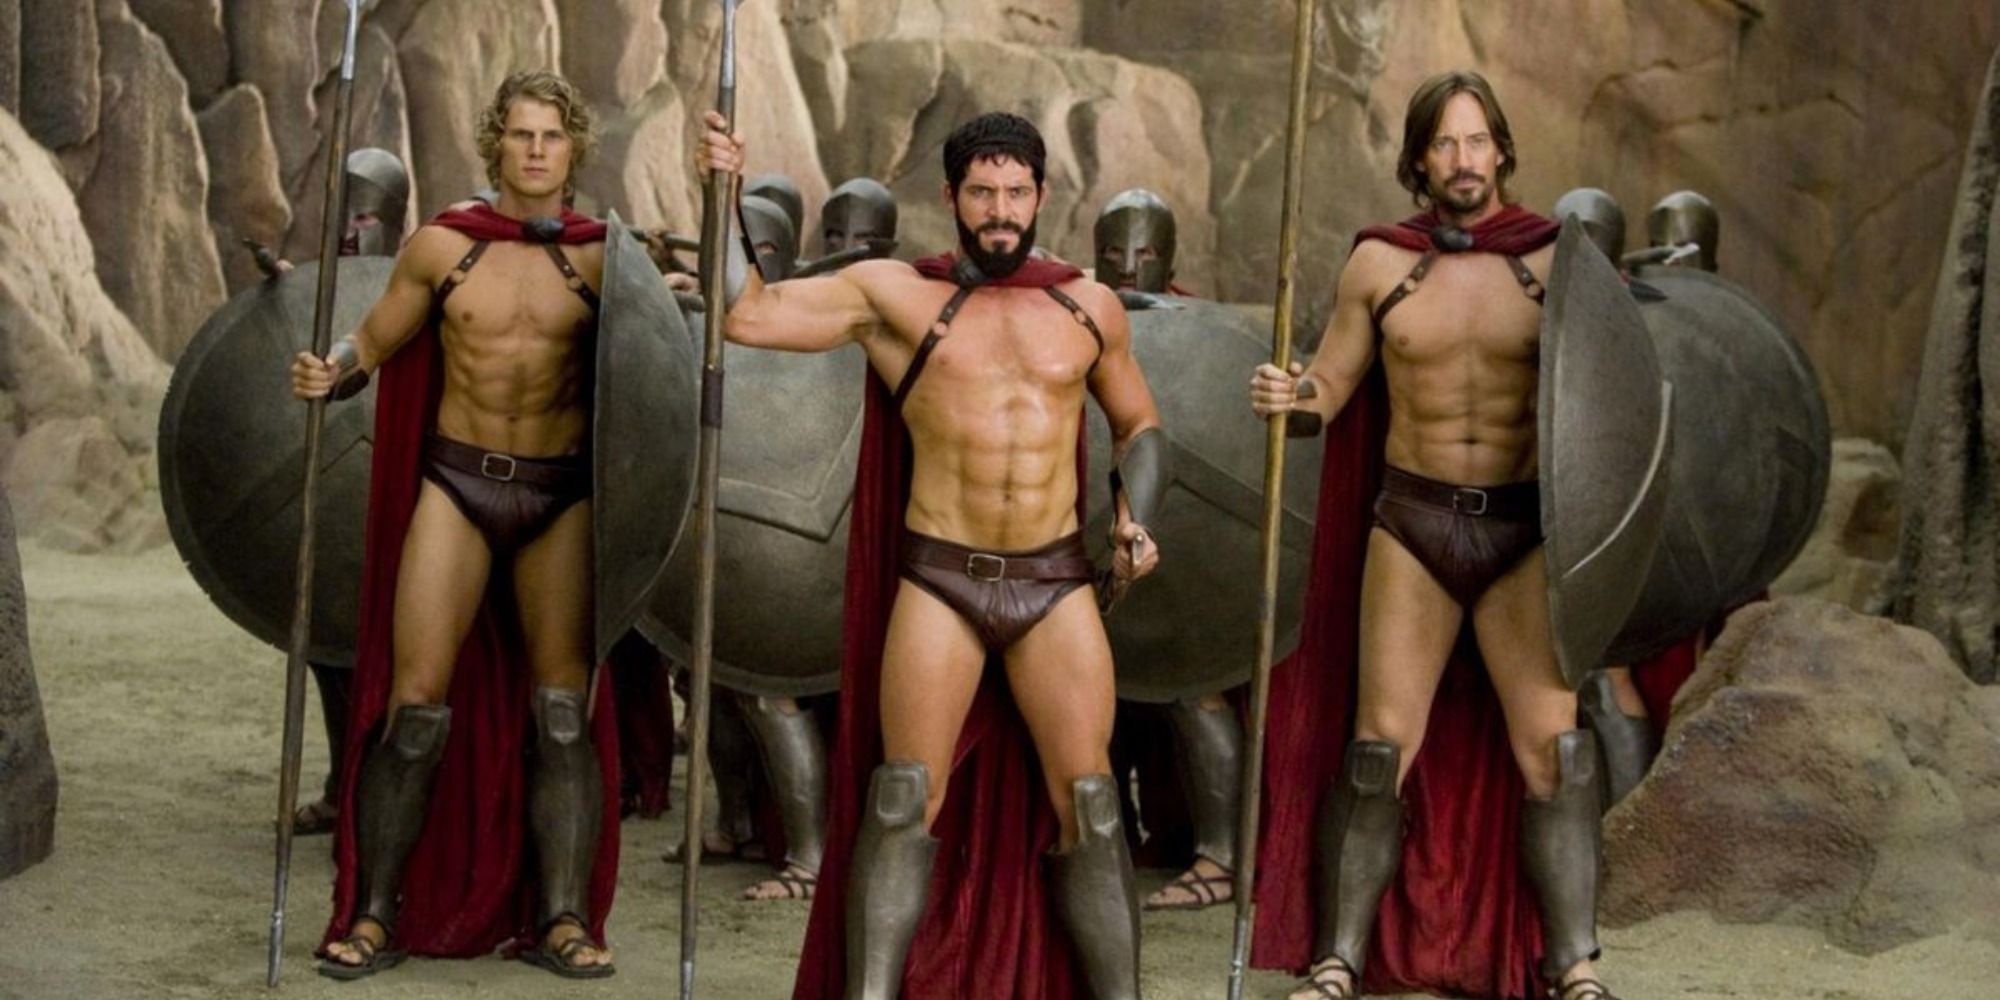 A scene from Meet the Spartans